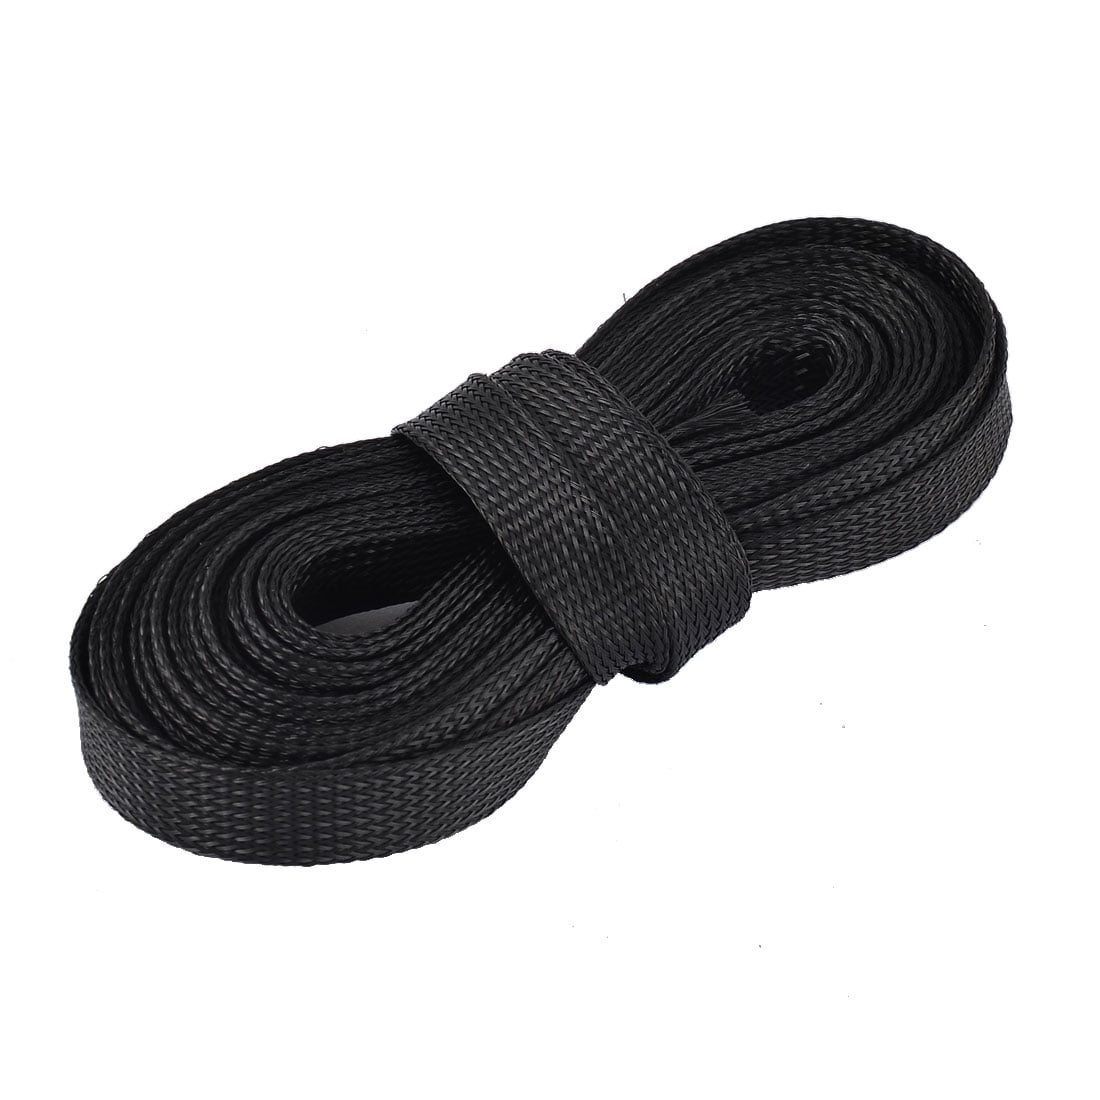 10 Meter 4mm Braided Sleeving Cable Harness Sheathing Expanding Sleeve Wire CG 